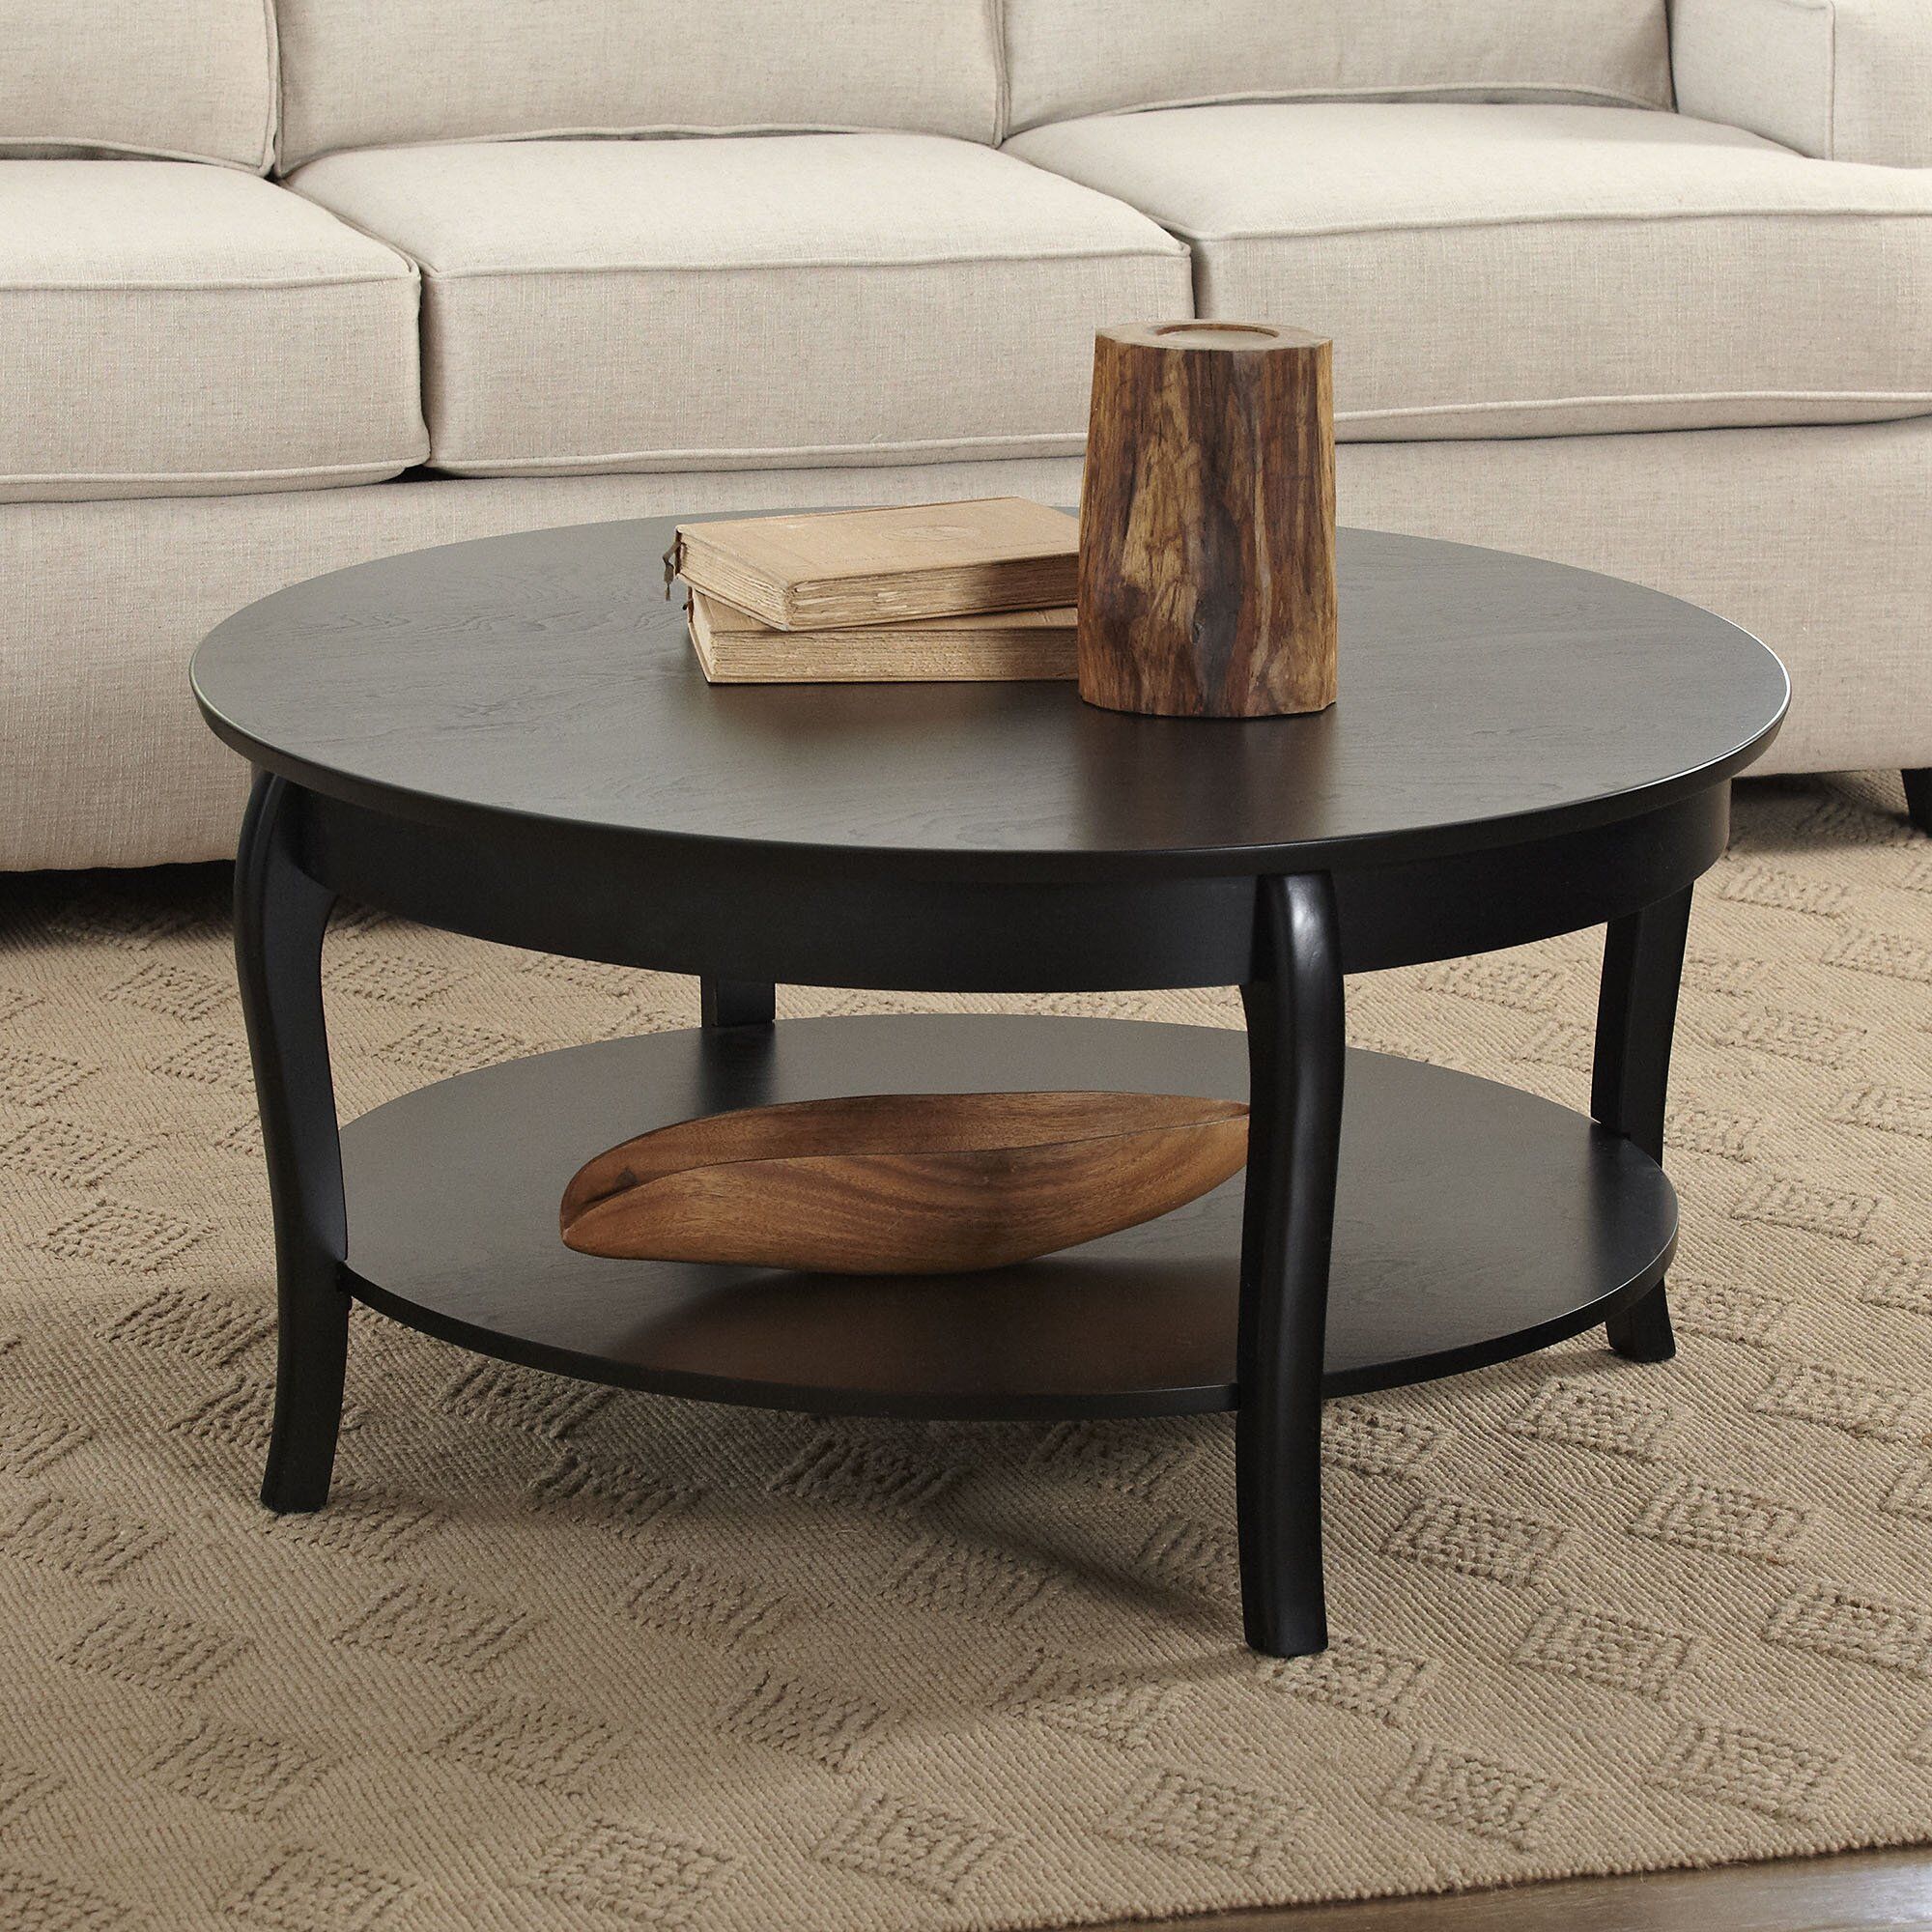 Birch Lane Alberts Round Coffee Table & Reviews | Wayfair Inside Round Coffee Tables (Gallery 10 of 20)